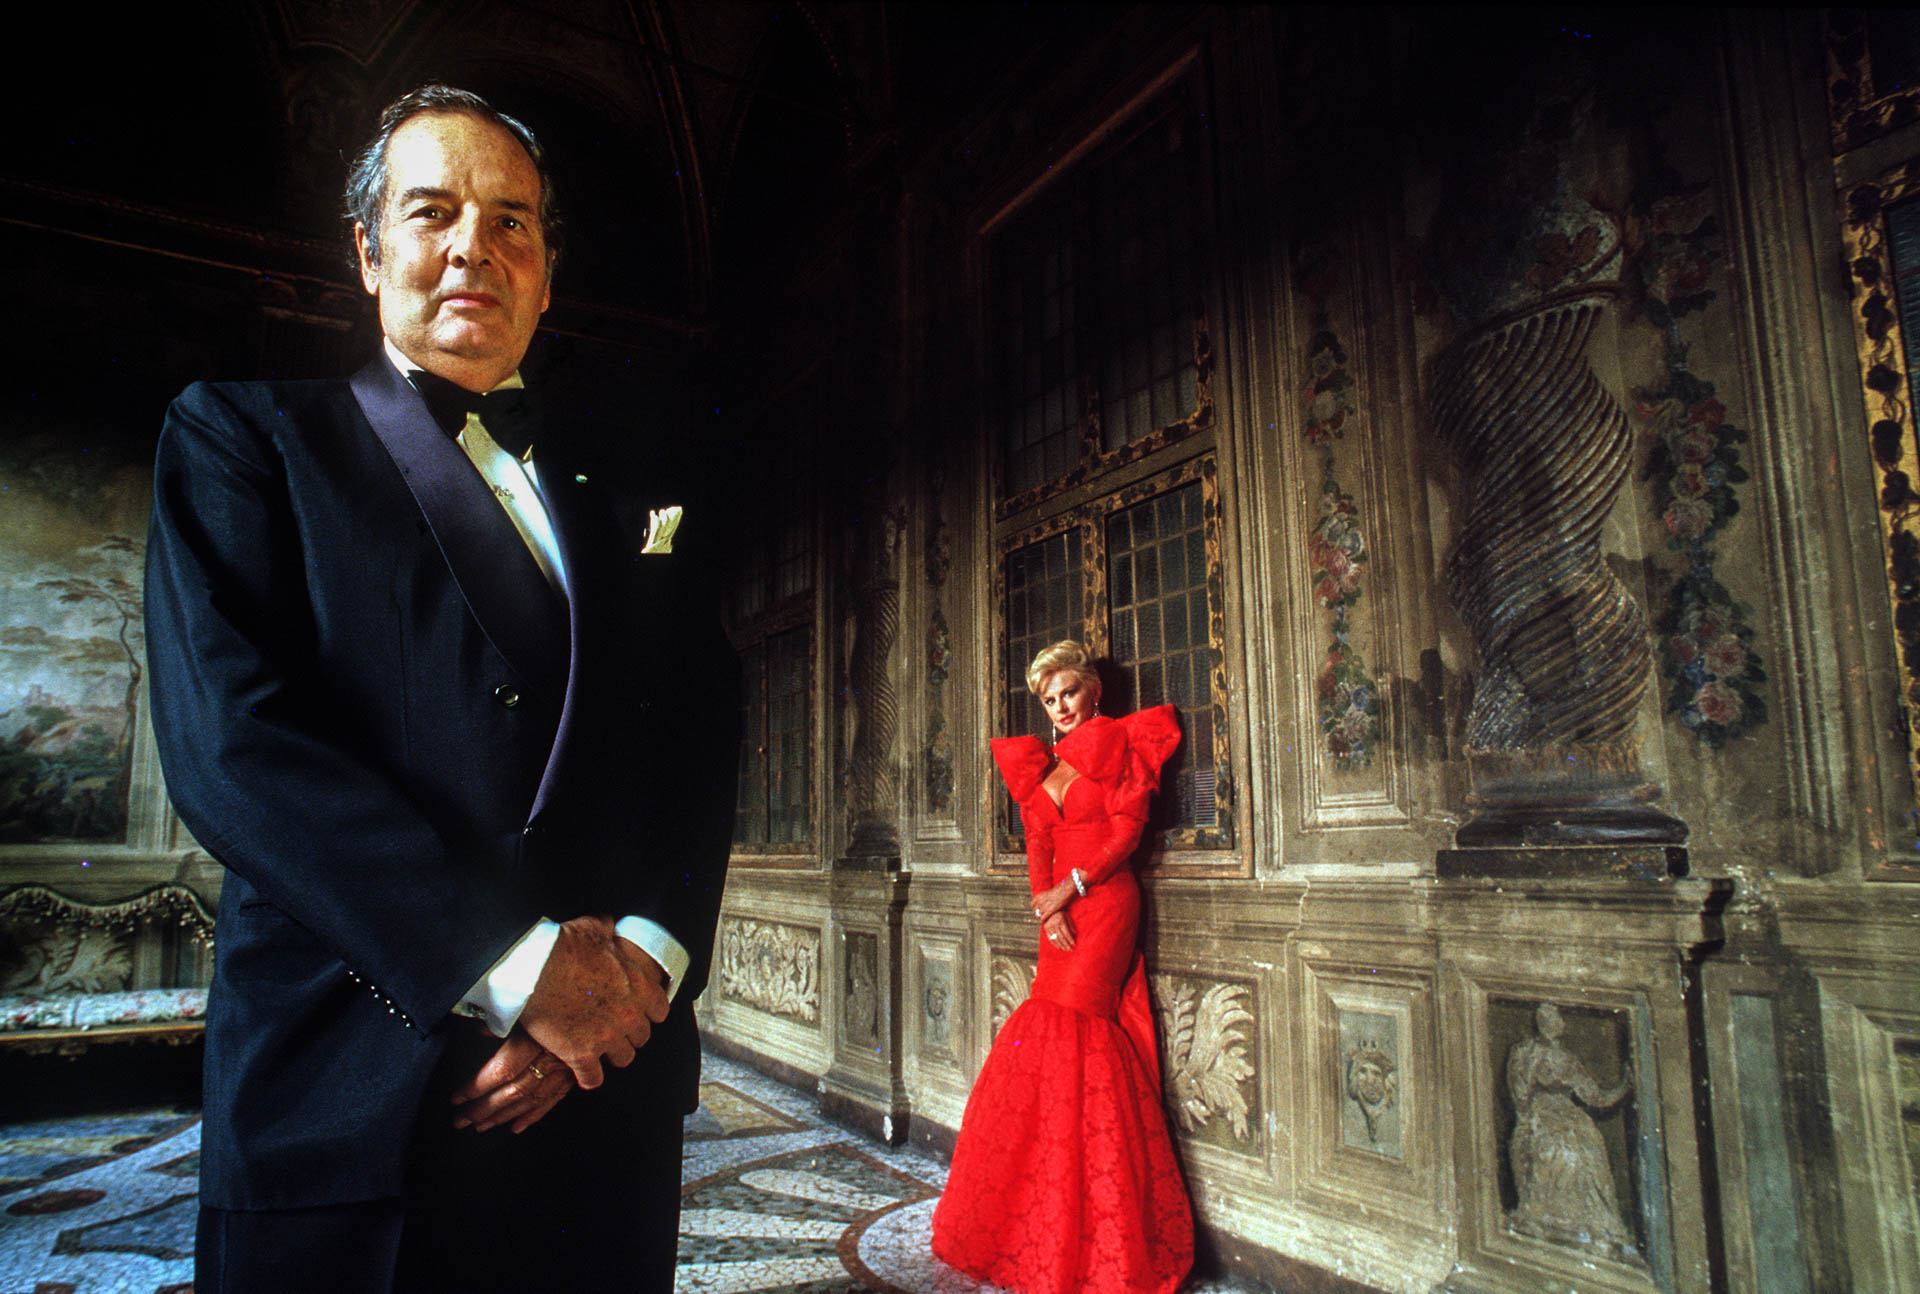  Rome, Italy - October 1987
Count and countess Dino and Donatella Pecci Blunt in the ballroom of their residence, Palazzo Pecci: once a year they host a reception for international leaders and celebrities.
© GIANNI GIANSANTI 